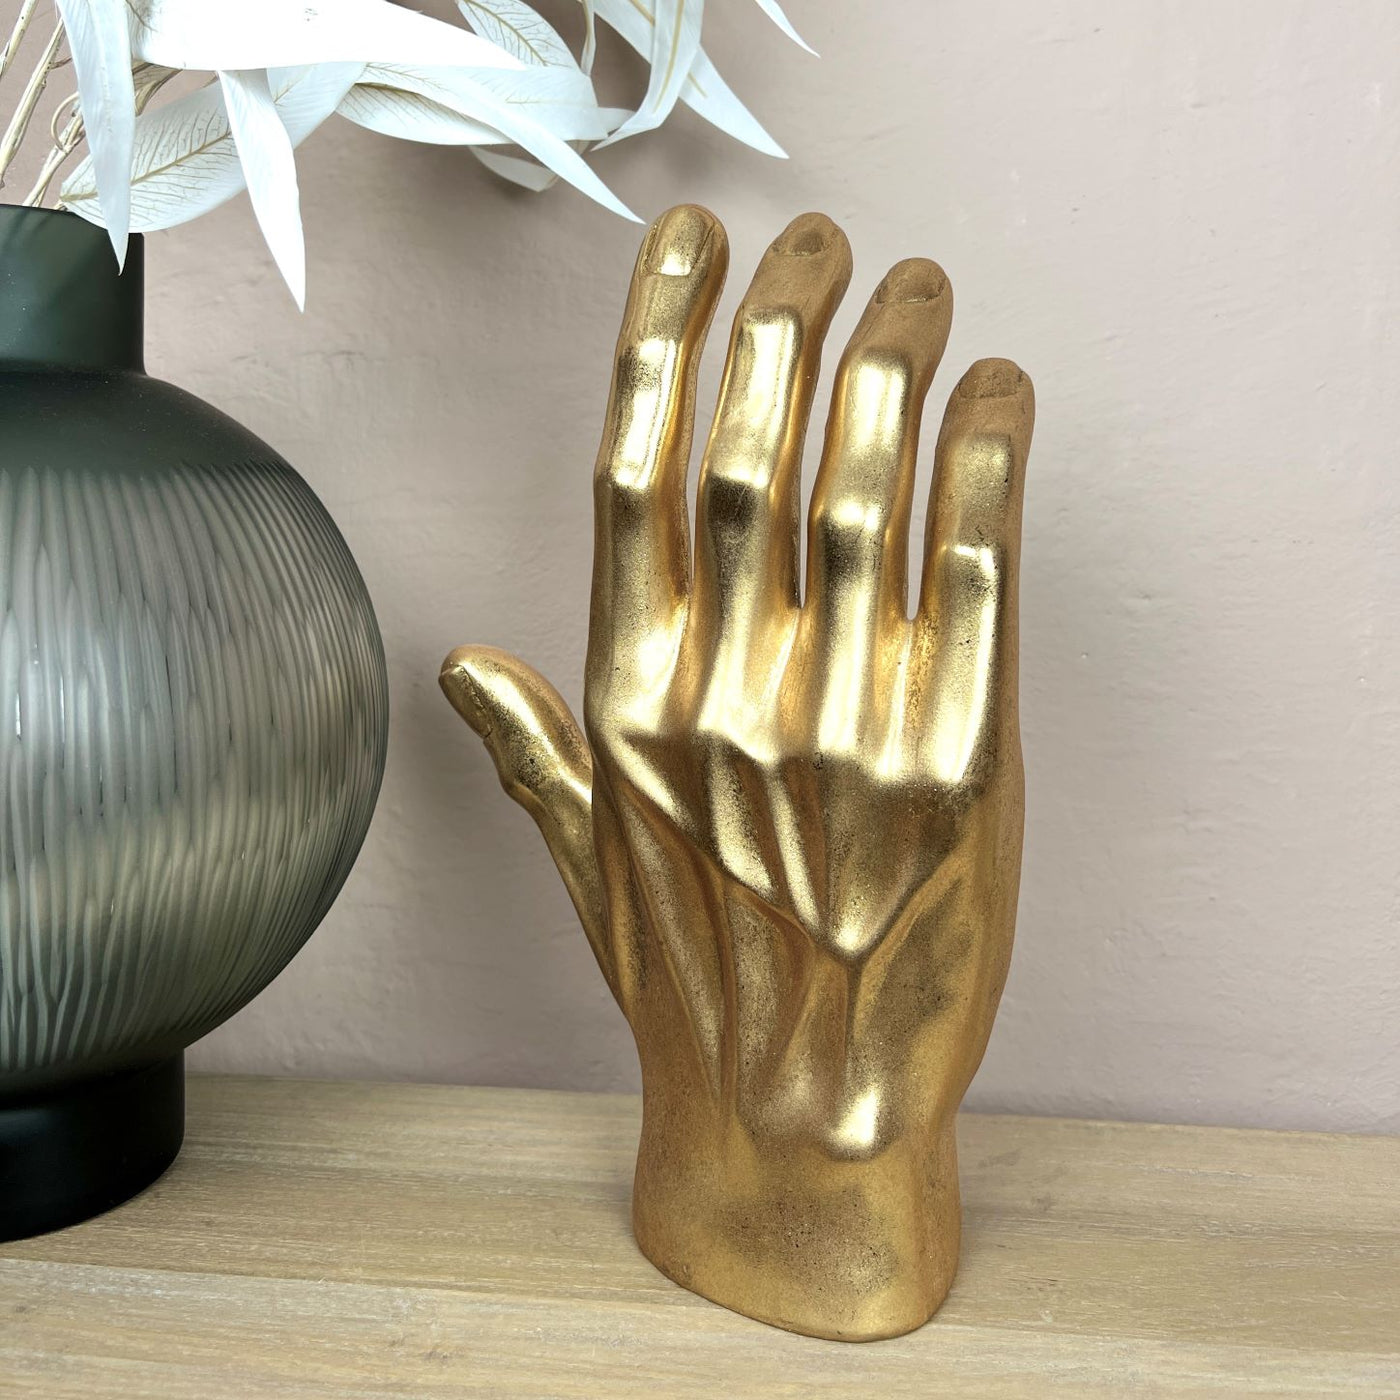 Giant Gold Hand-Mrs Robinson